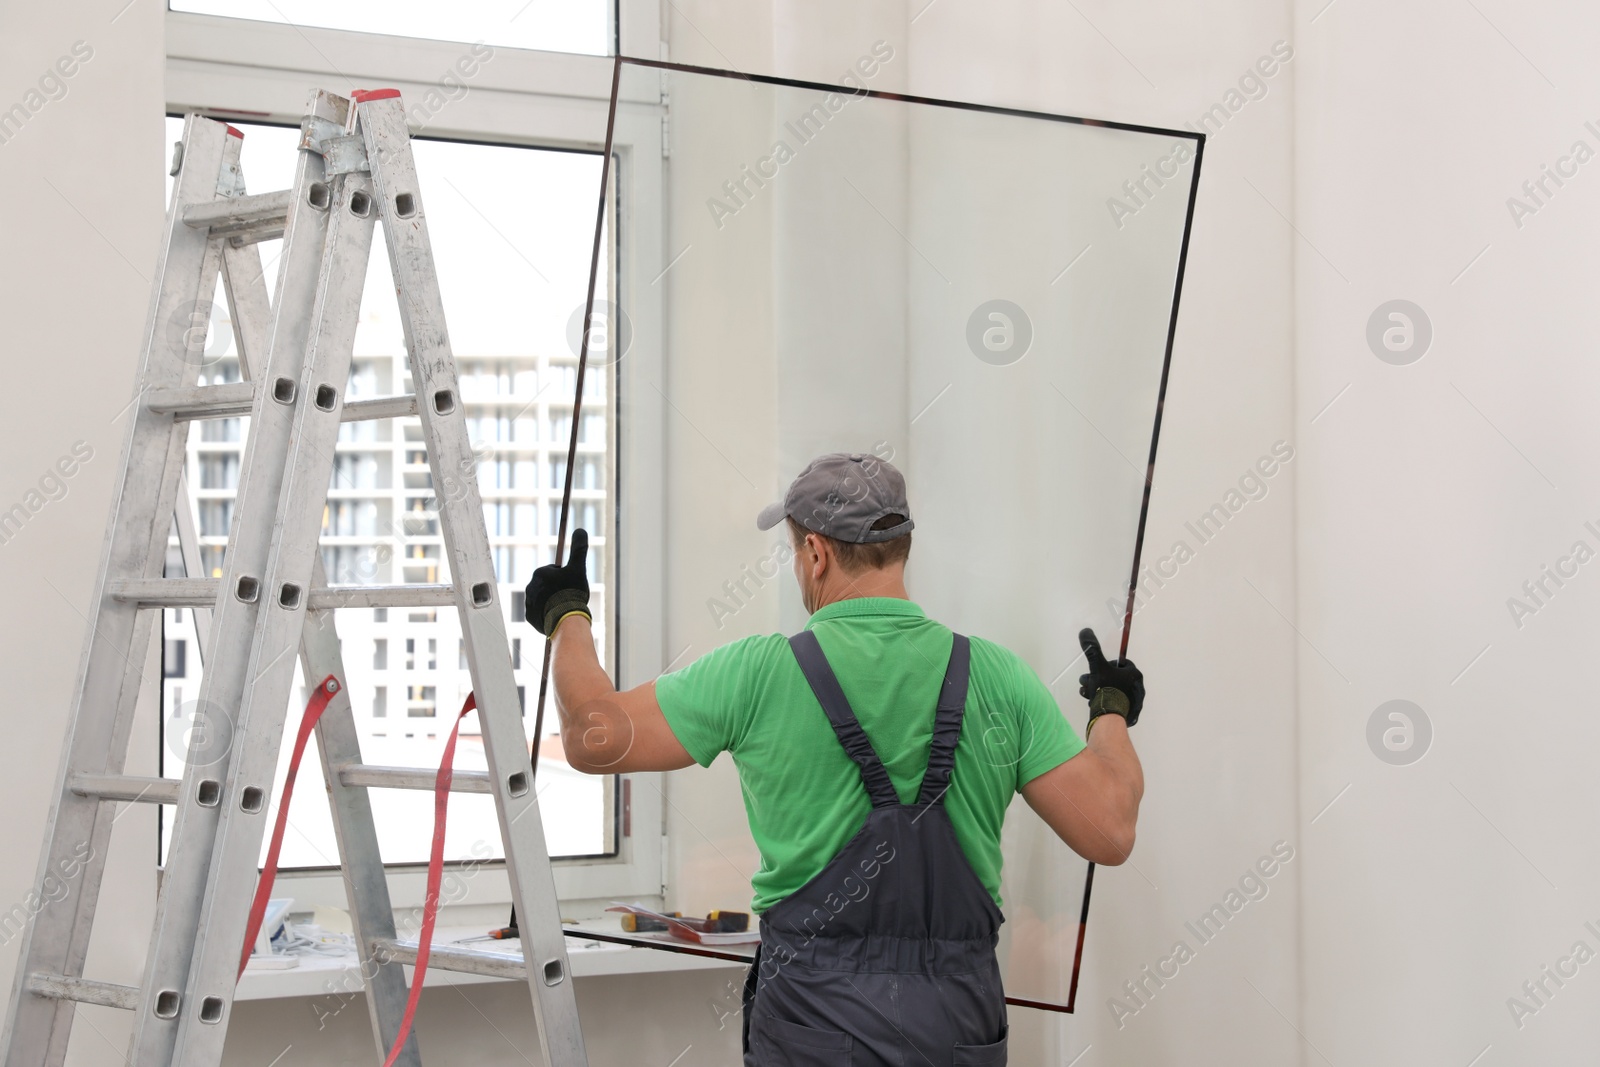 Photo of Worker in uniform holding double glazing window indoors, back view